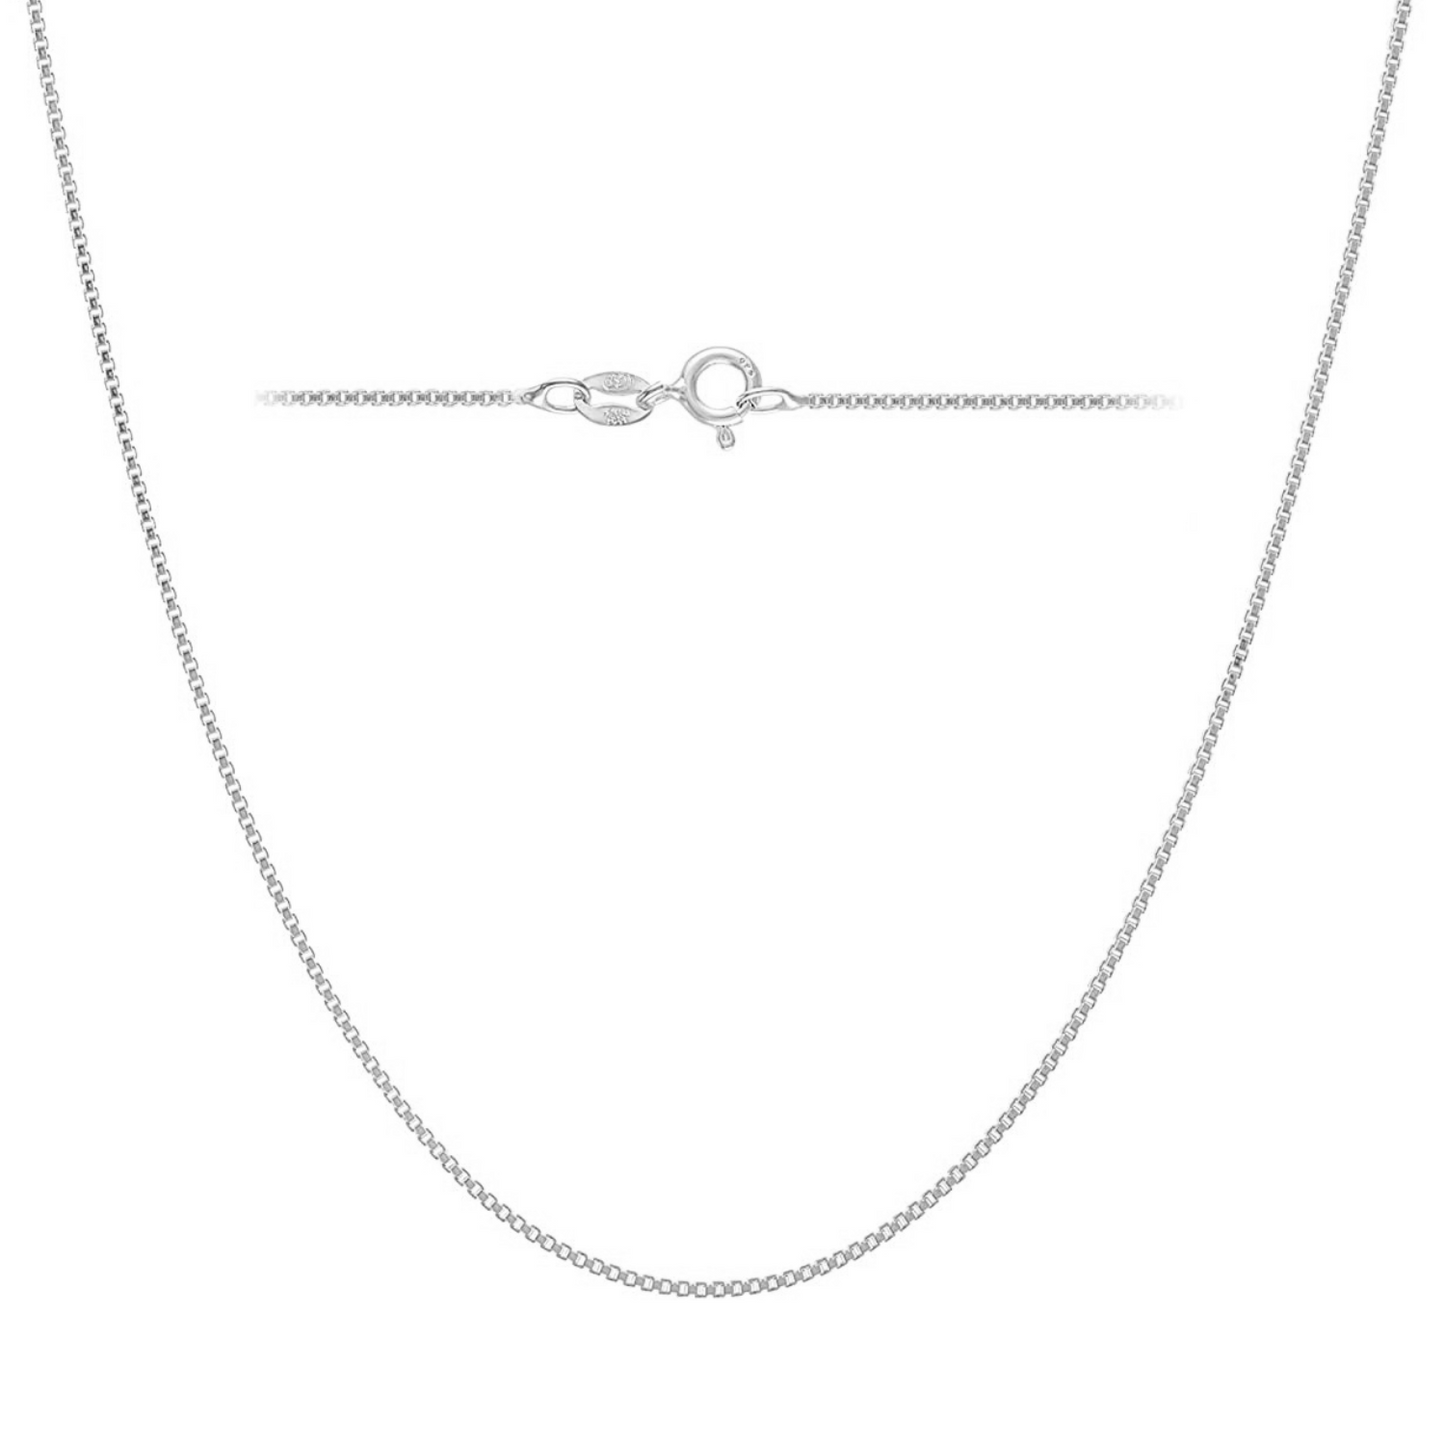 92.5 Sterling Silver, Box Chain 16 inches + 2 inch extension